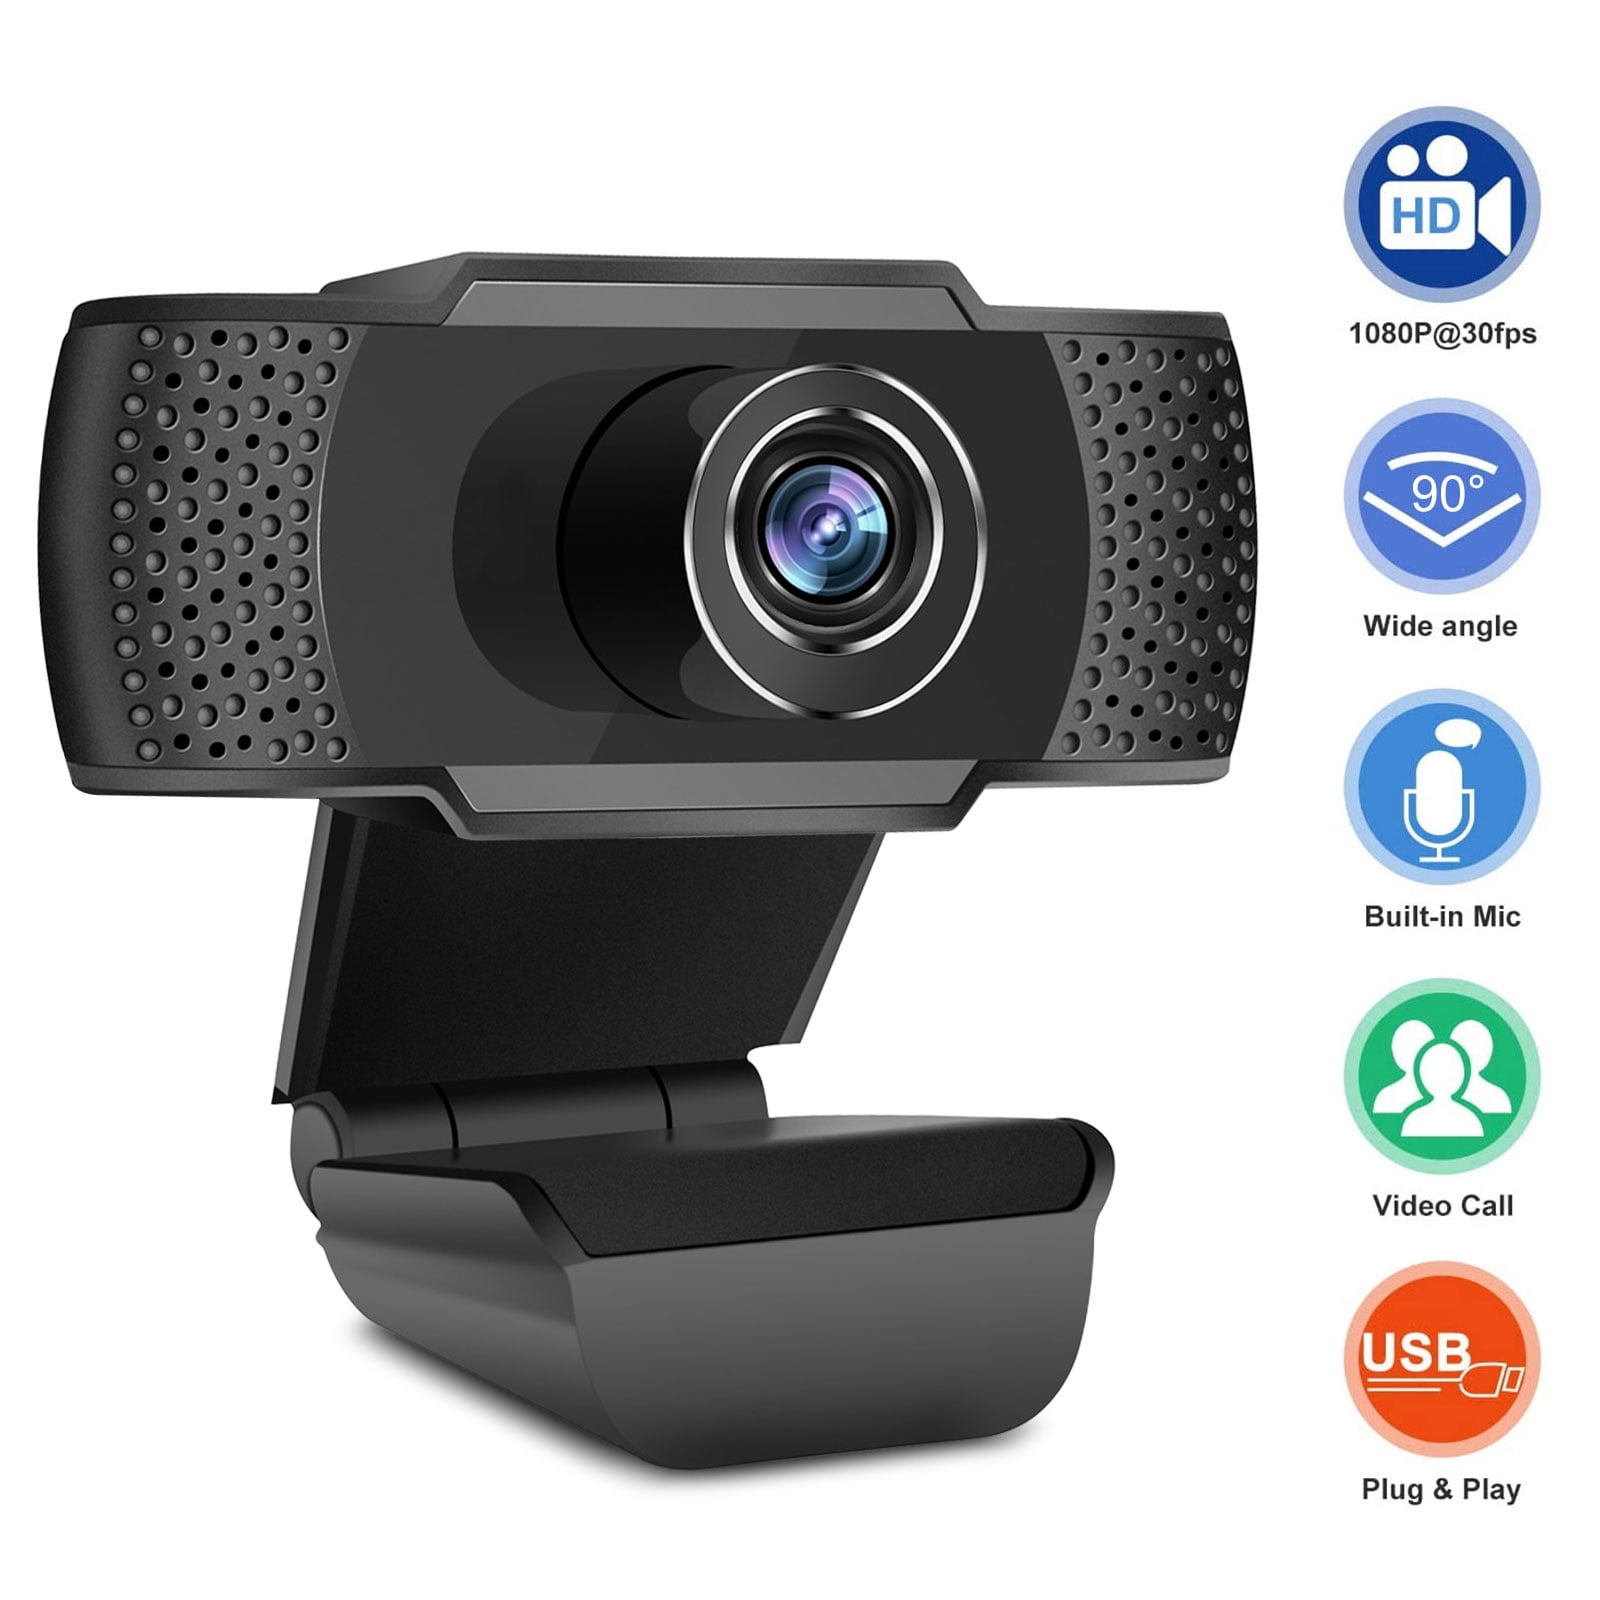 USB Computer Webcam for Video Calling Streaming Computer Web Camera with Support 3D Denoising and Automatic Gain PC Webcam Webcam Webcam with Microphone Online Classes and Video Conference